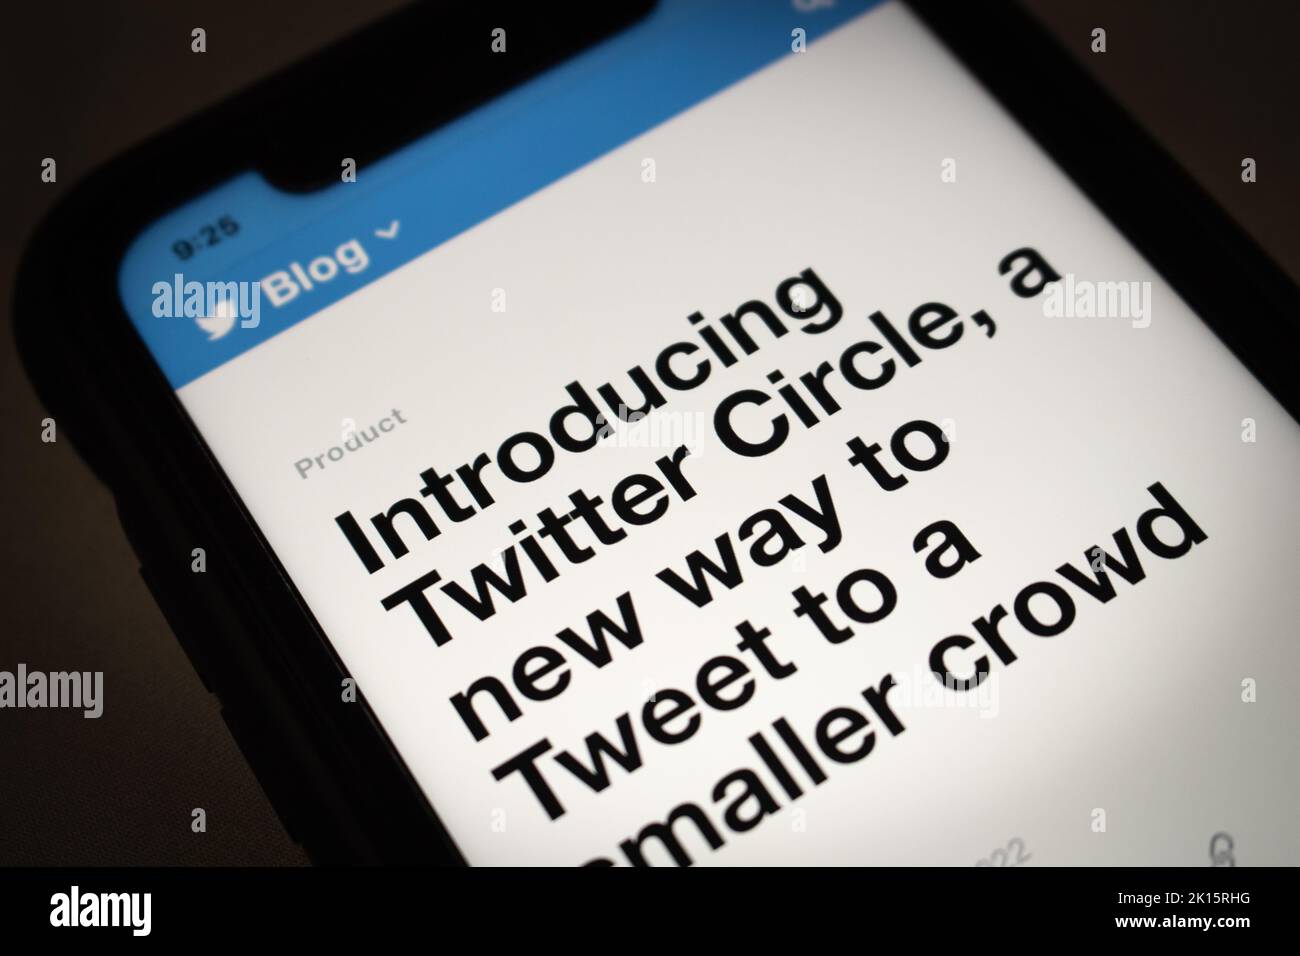 Blog post about Twitter Circle from Twitter’s official blog in dark mood. Twitter Circle is a way to send Tweets to selected people or a smaller crowd Stock Photo